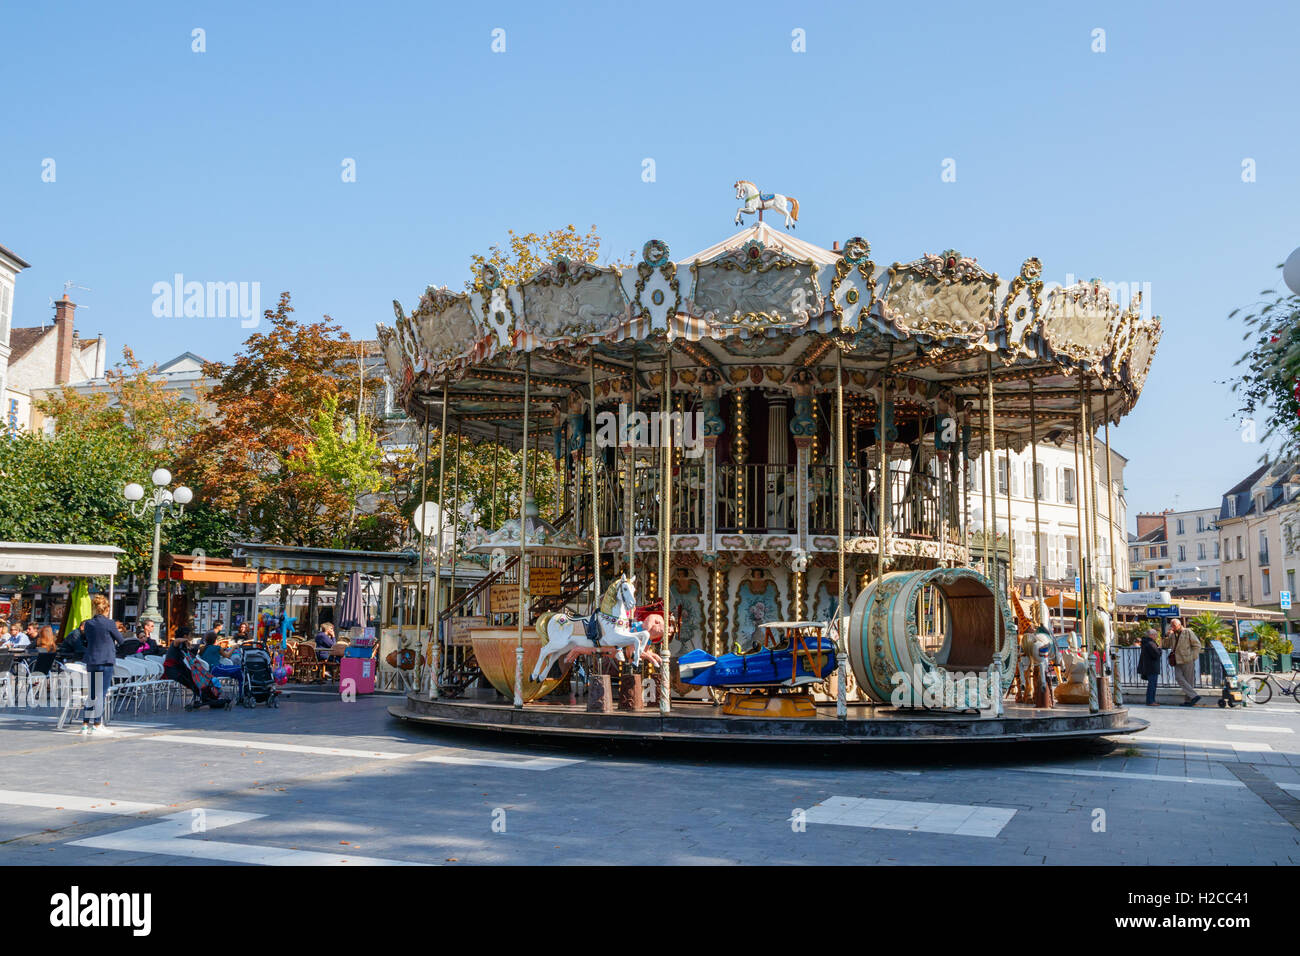 Old fashioned carousel on the main square of Fontainebleau, France. Stock Photo